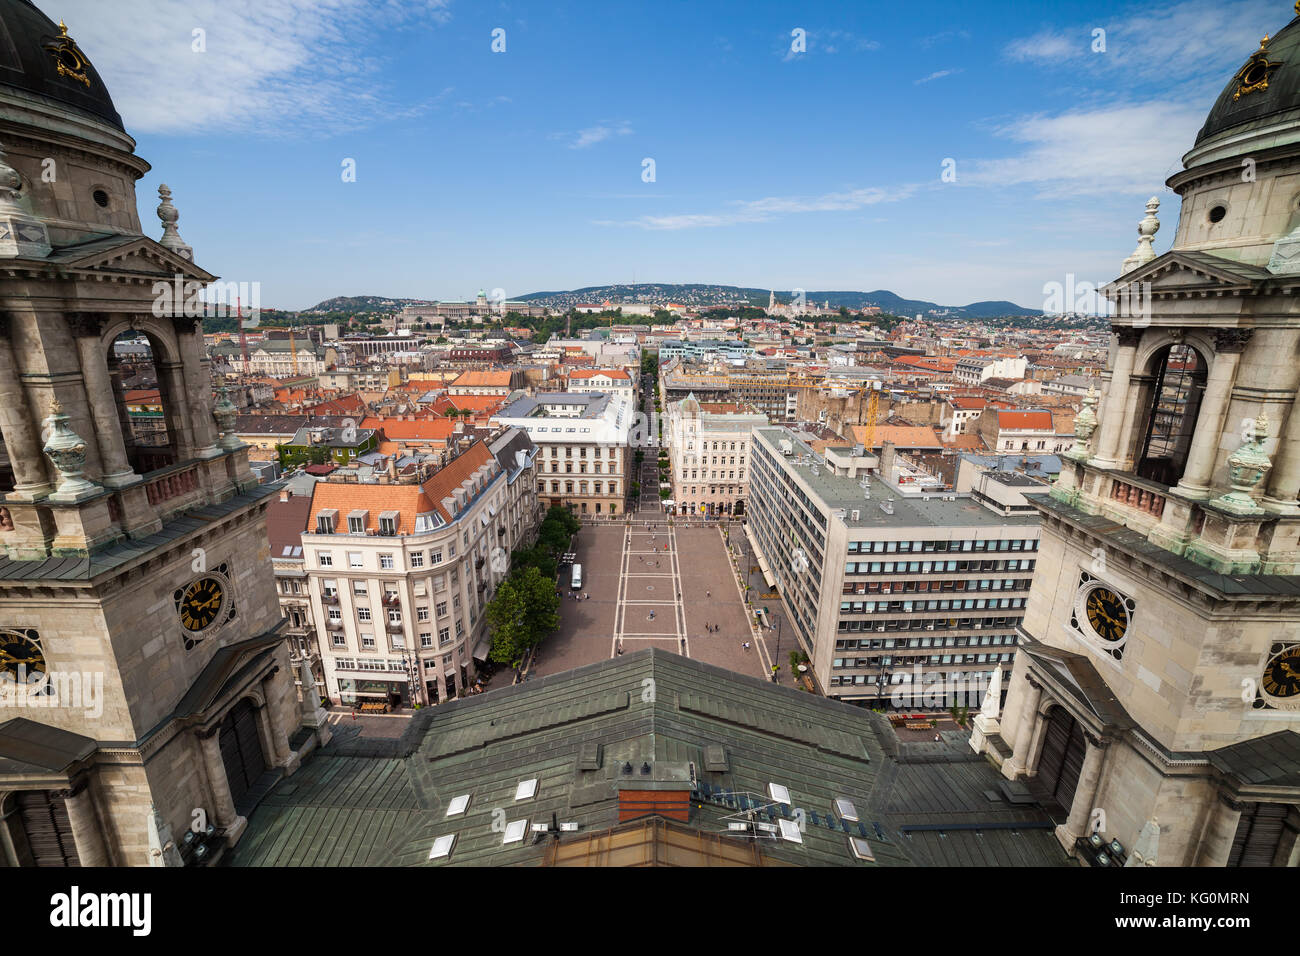 Hungary, Budapest, city centre with Szent Istvan Square framed by St. Stephen's Basilica bell towers Stock Photo